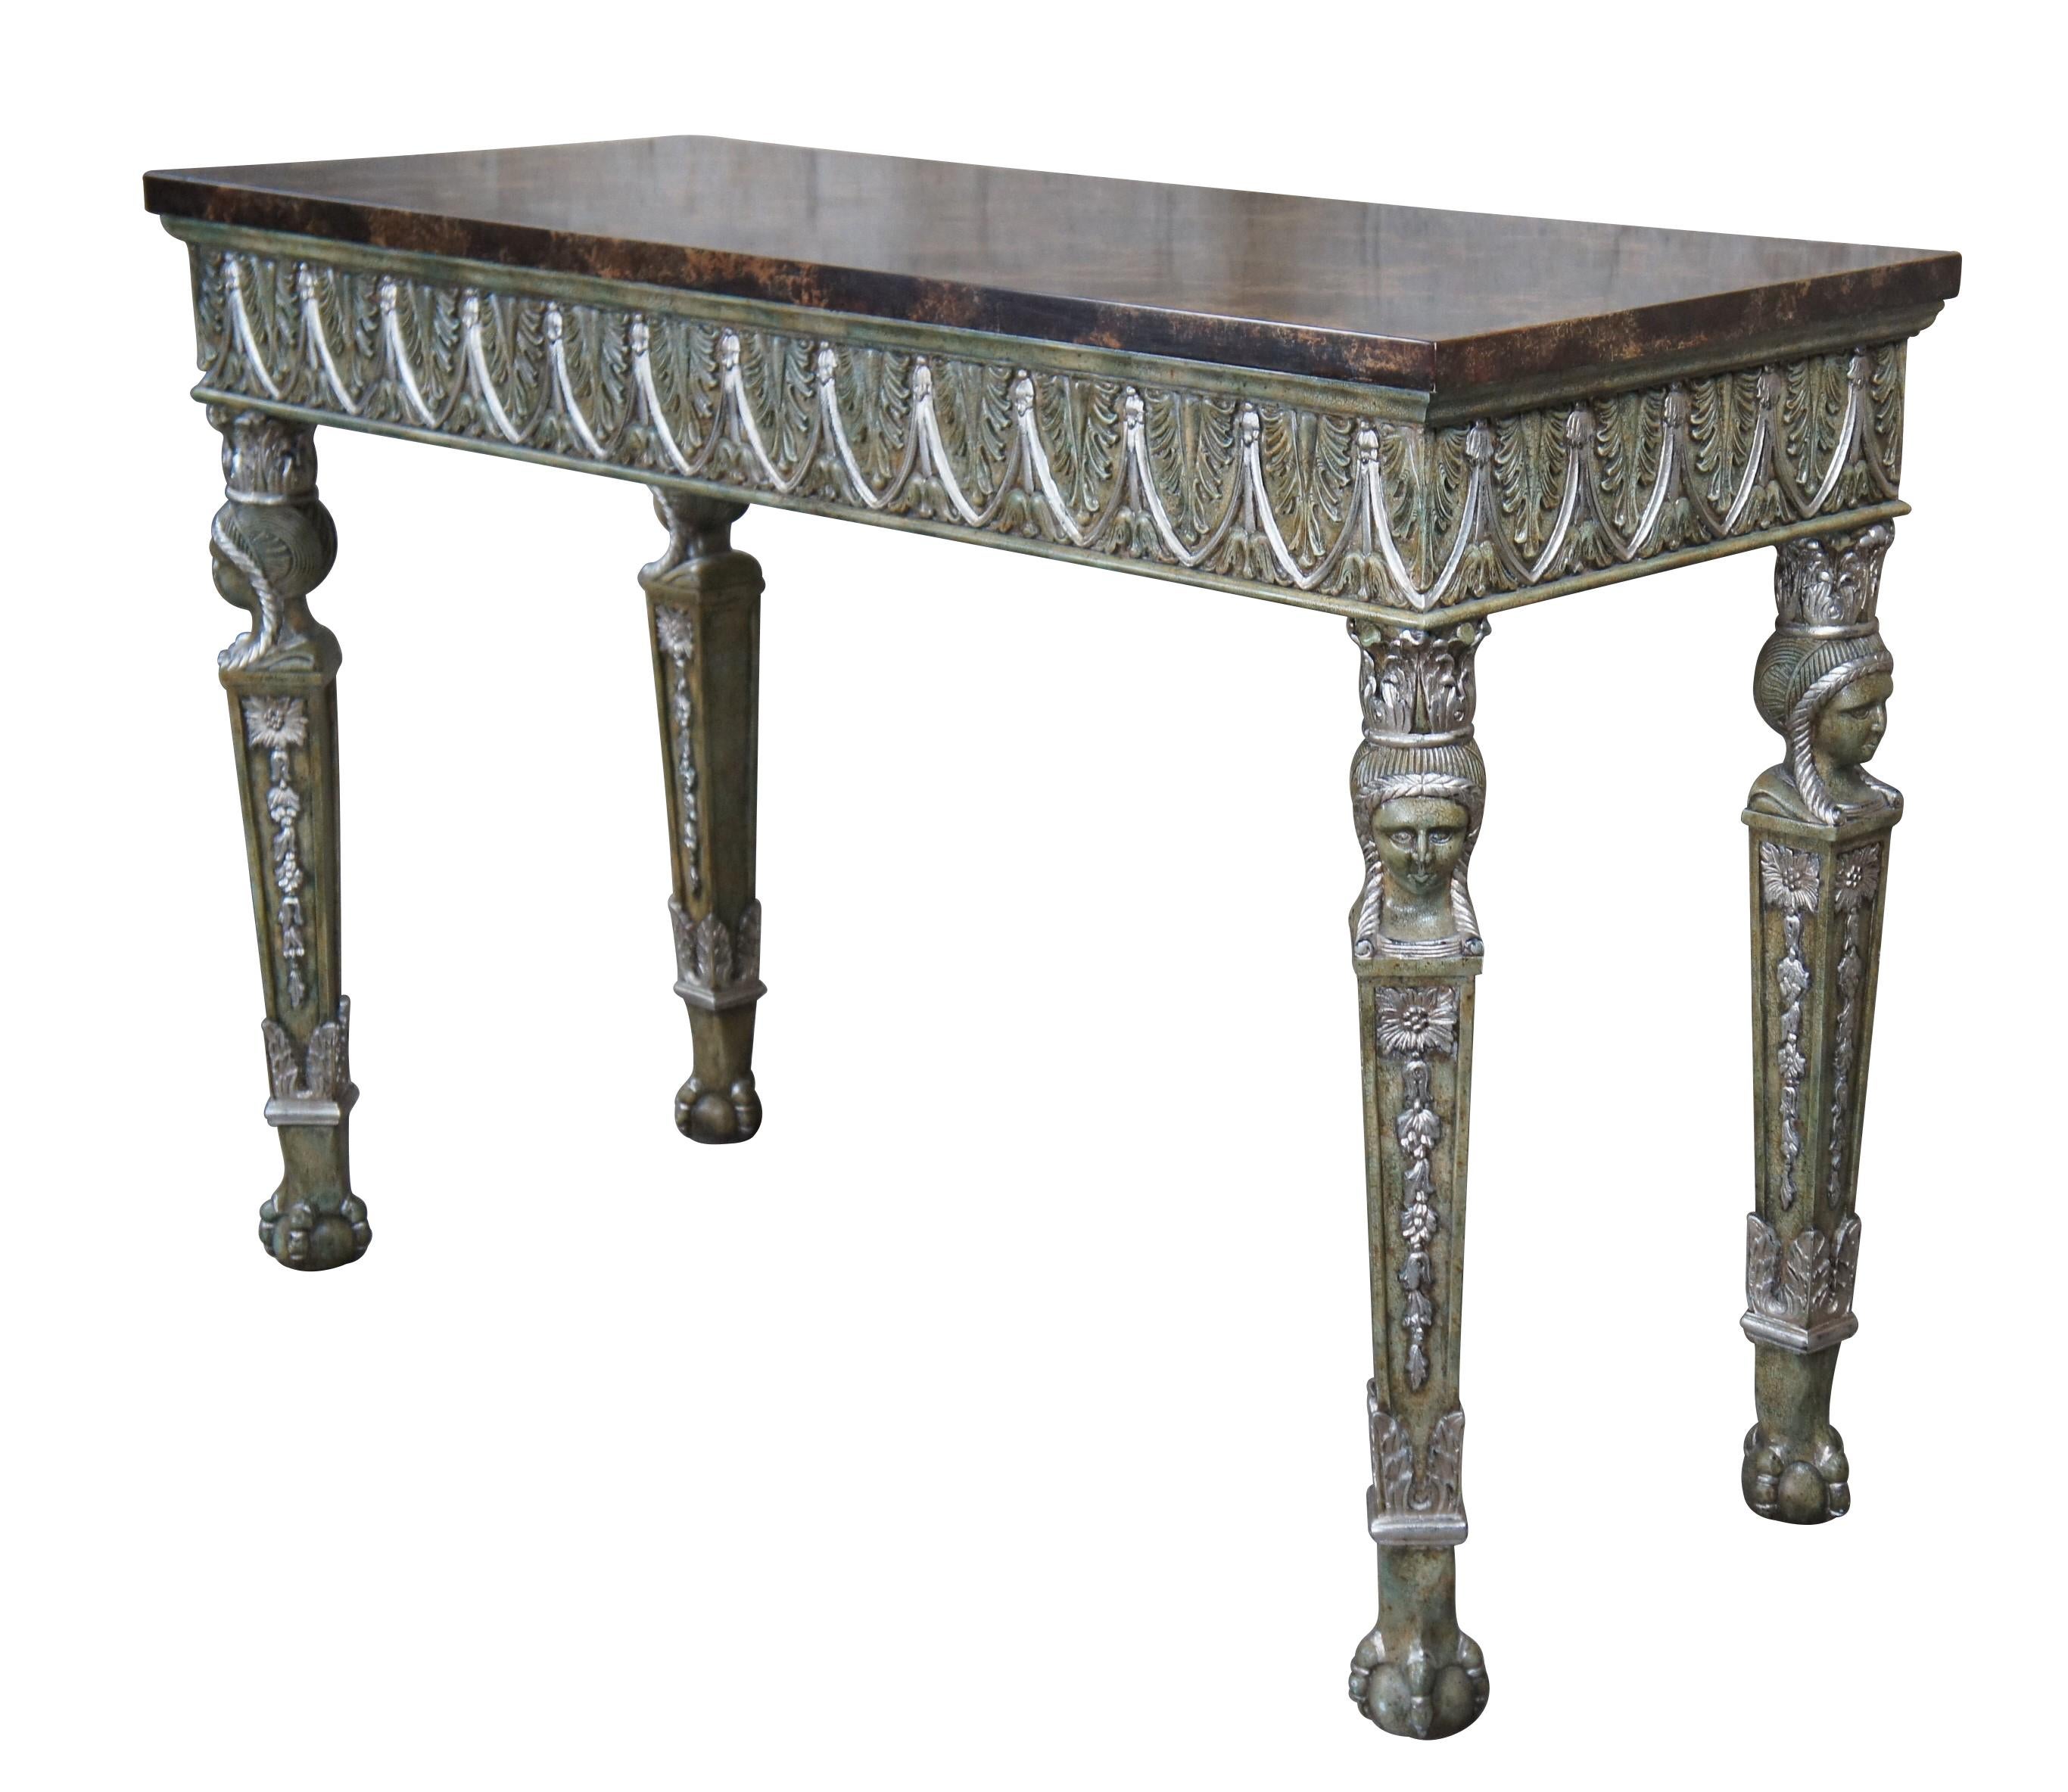 Vintage Maitland Smith console / entry sideboard table featuring French Empire & Egyptian revival styling with faux marble top over acanthus skirt supported by tapered column legs with caryatid (bust) of a female figure and ball and claw feet. Base